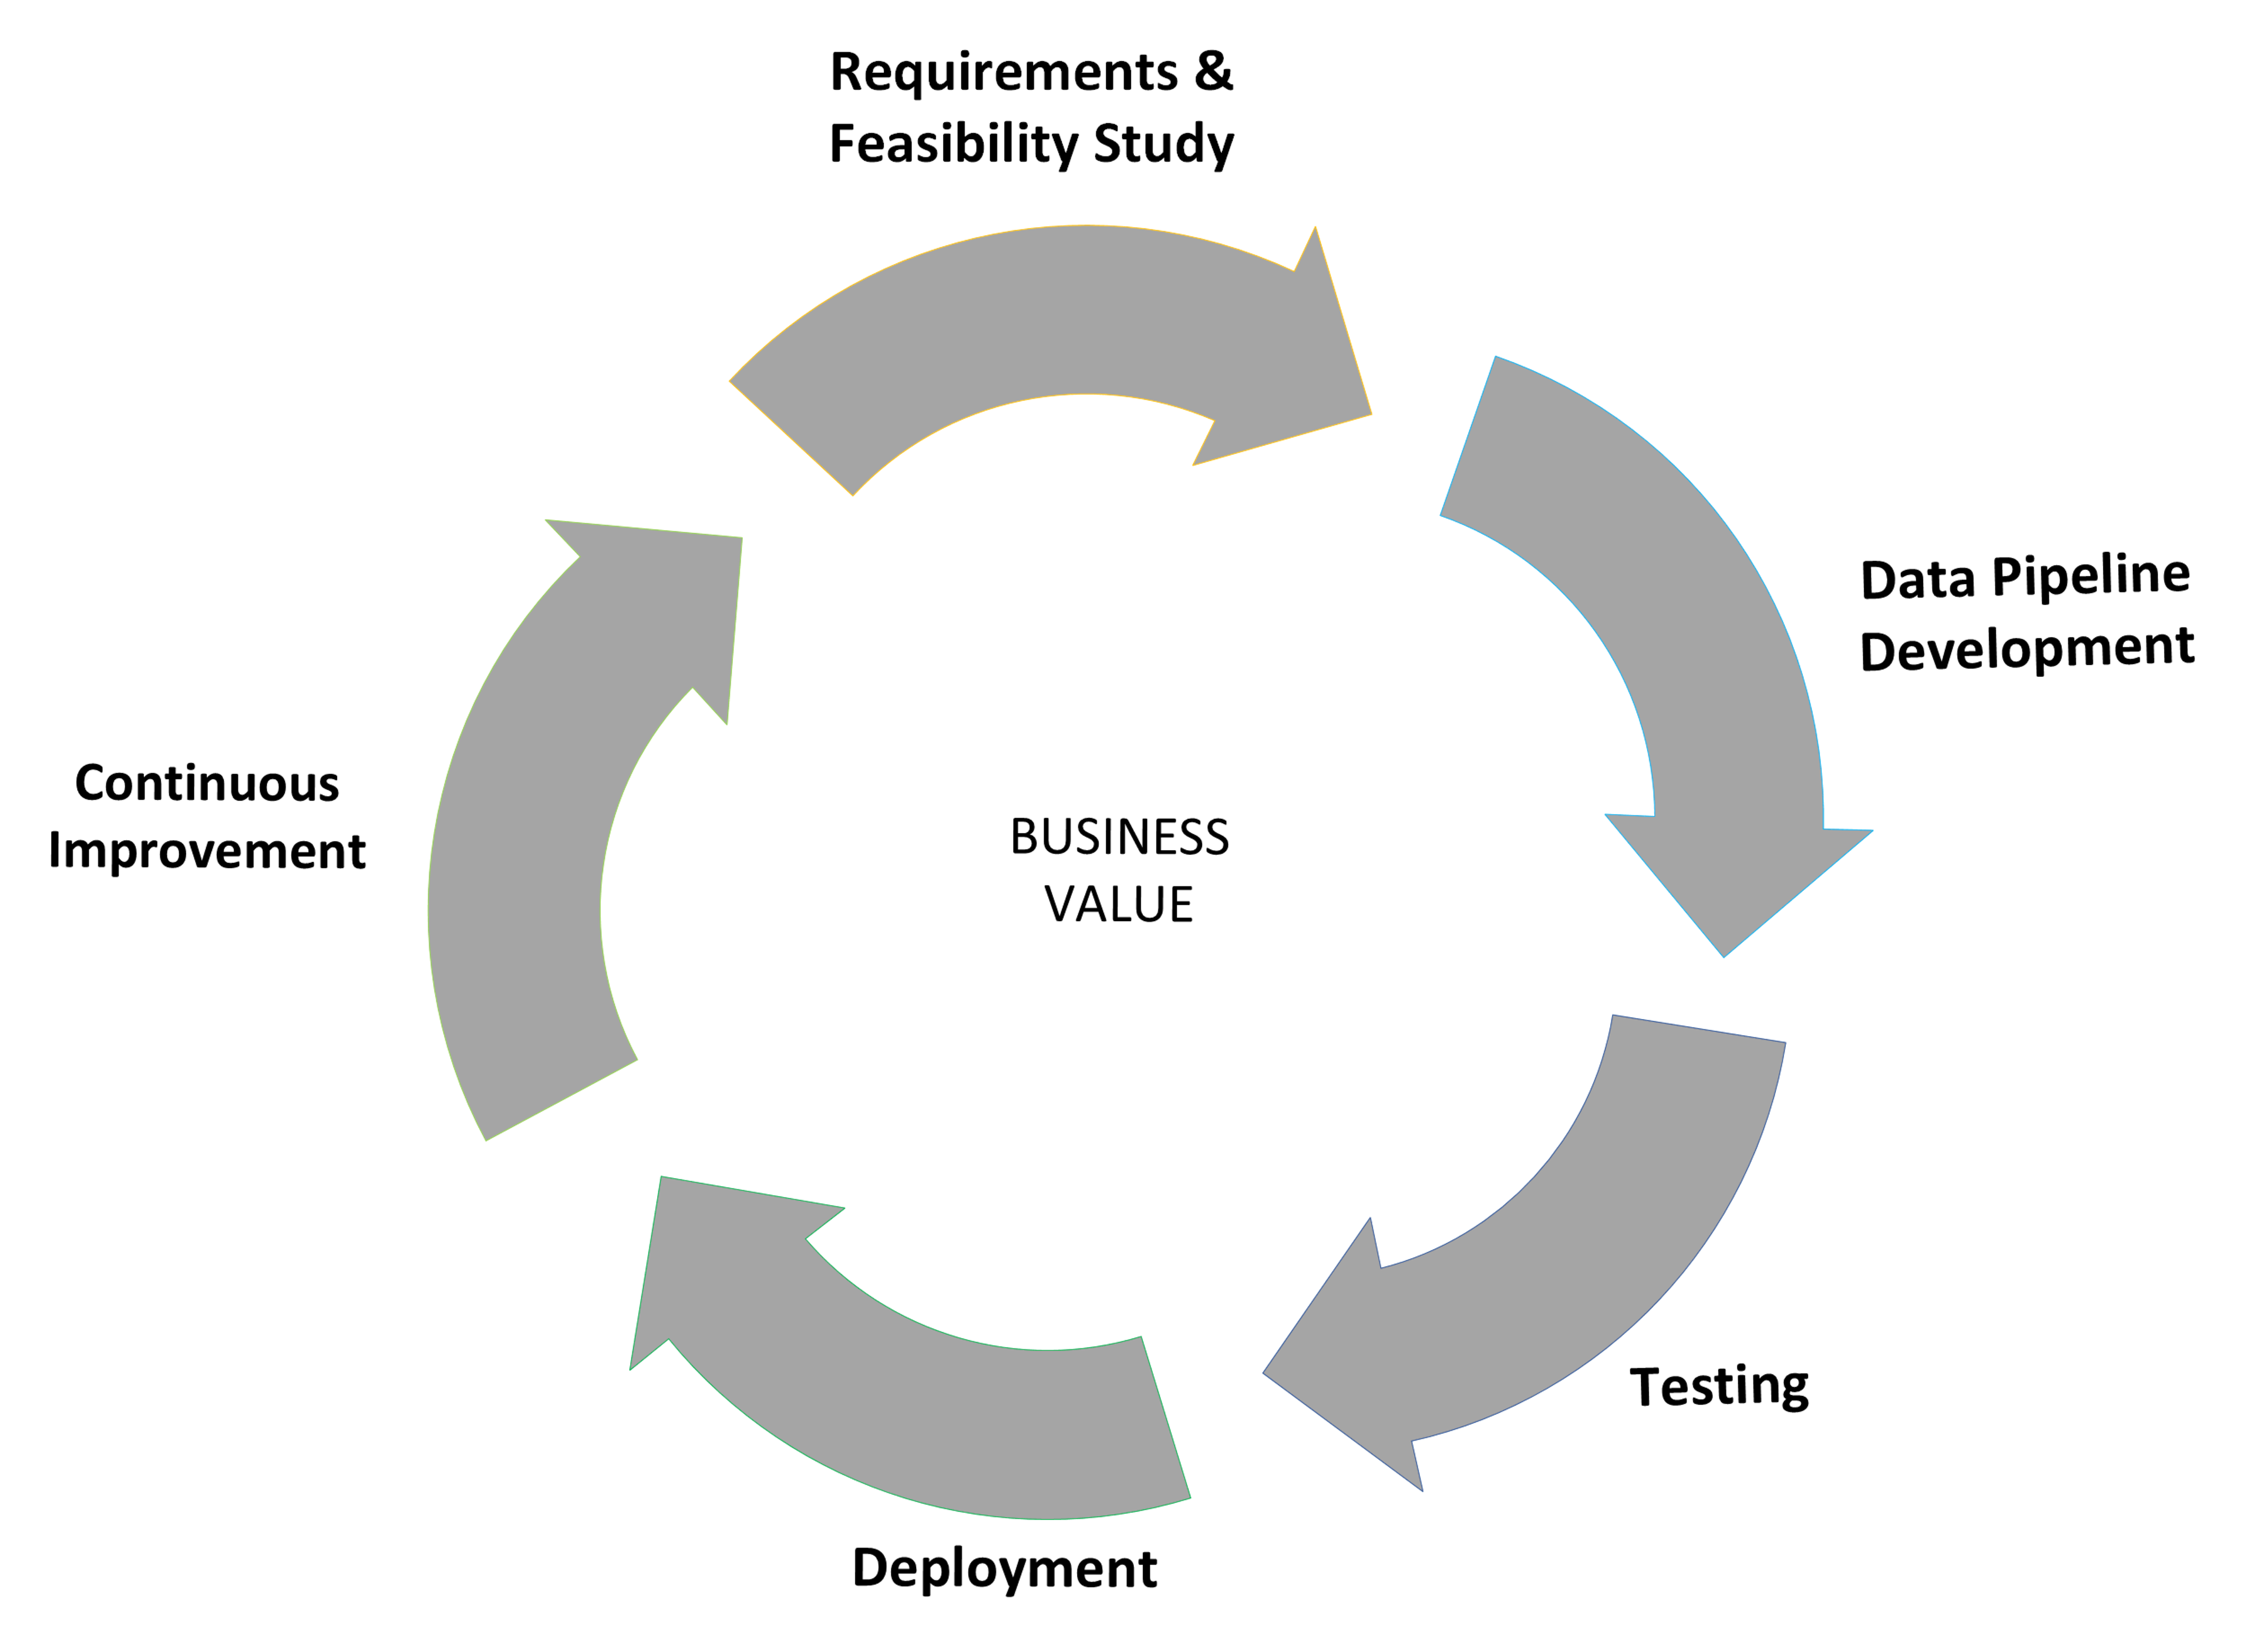 Data product lifecycle is similar to the well-known software development life cycle.